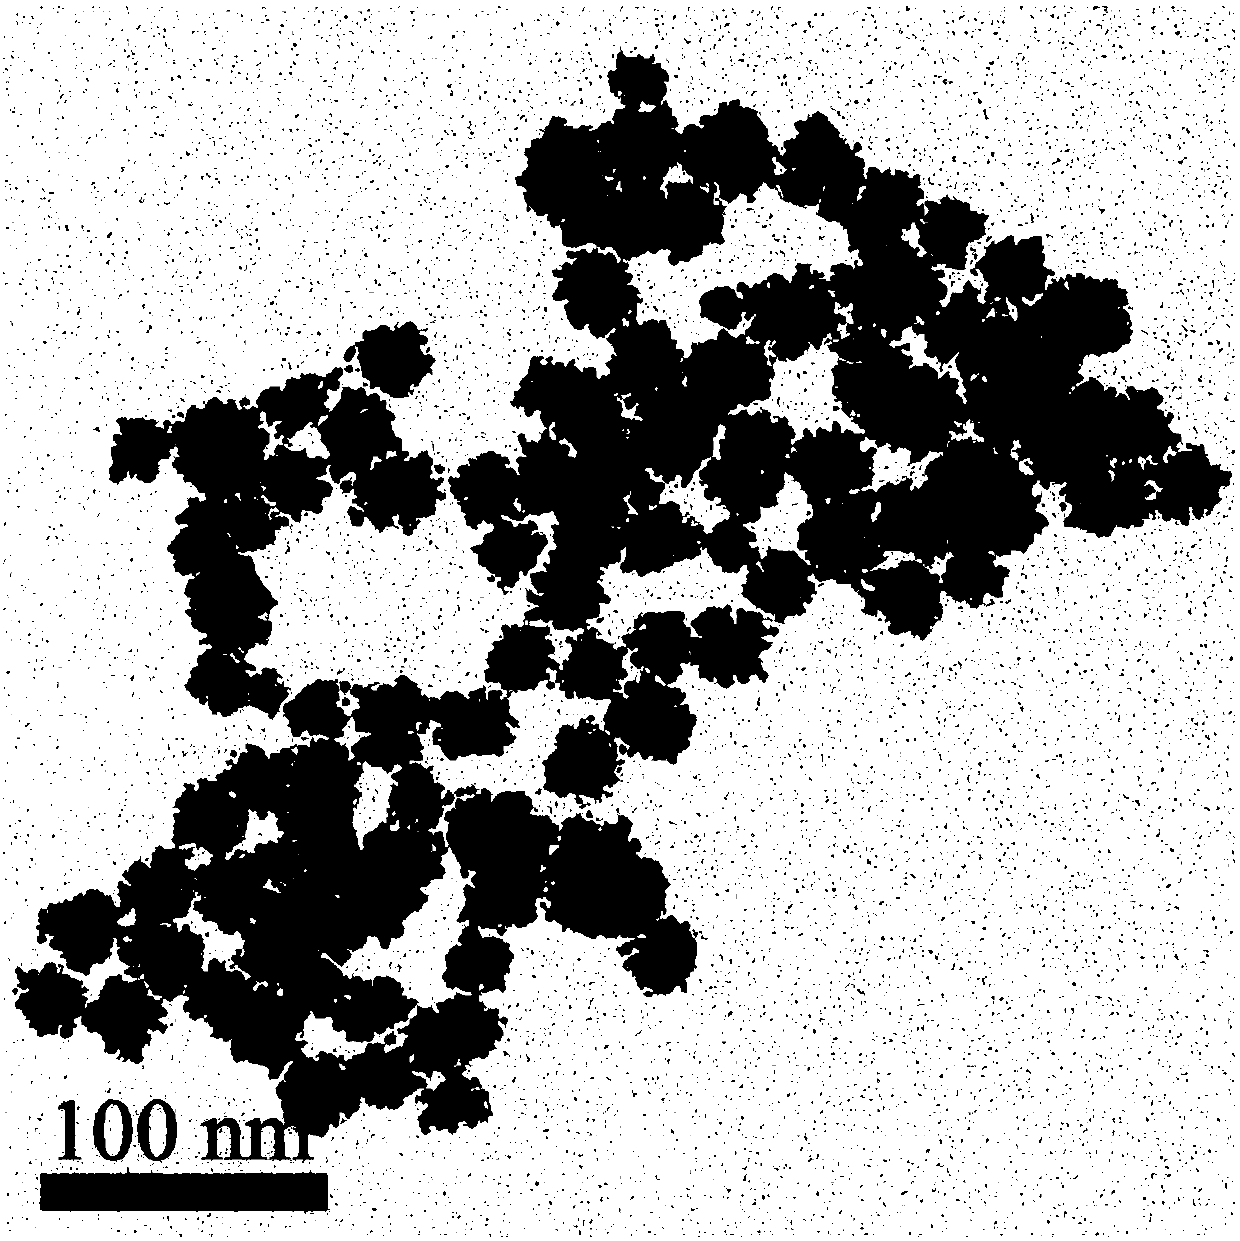 Dendritic PdPt nanoparticle for electrocatalytic methanol oxidization and preparation method of dendritic PdPt nanoparticle